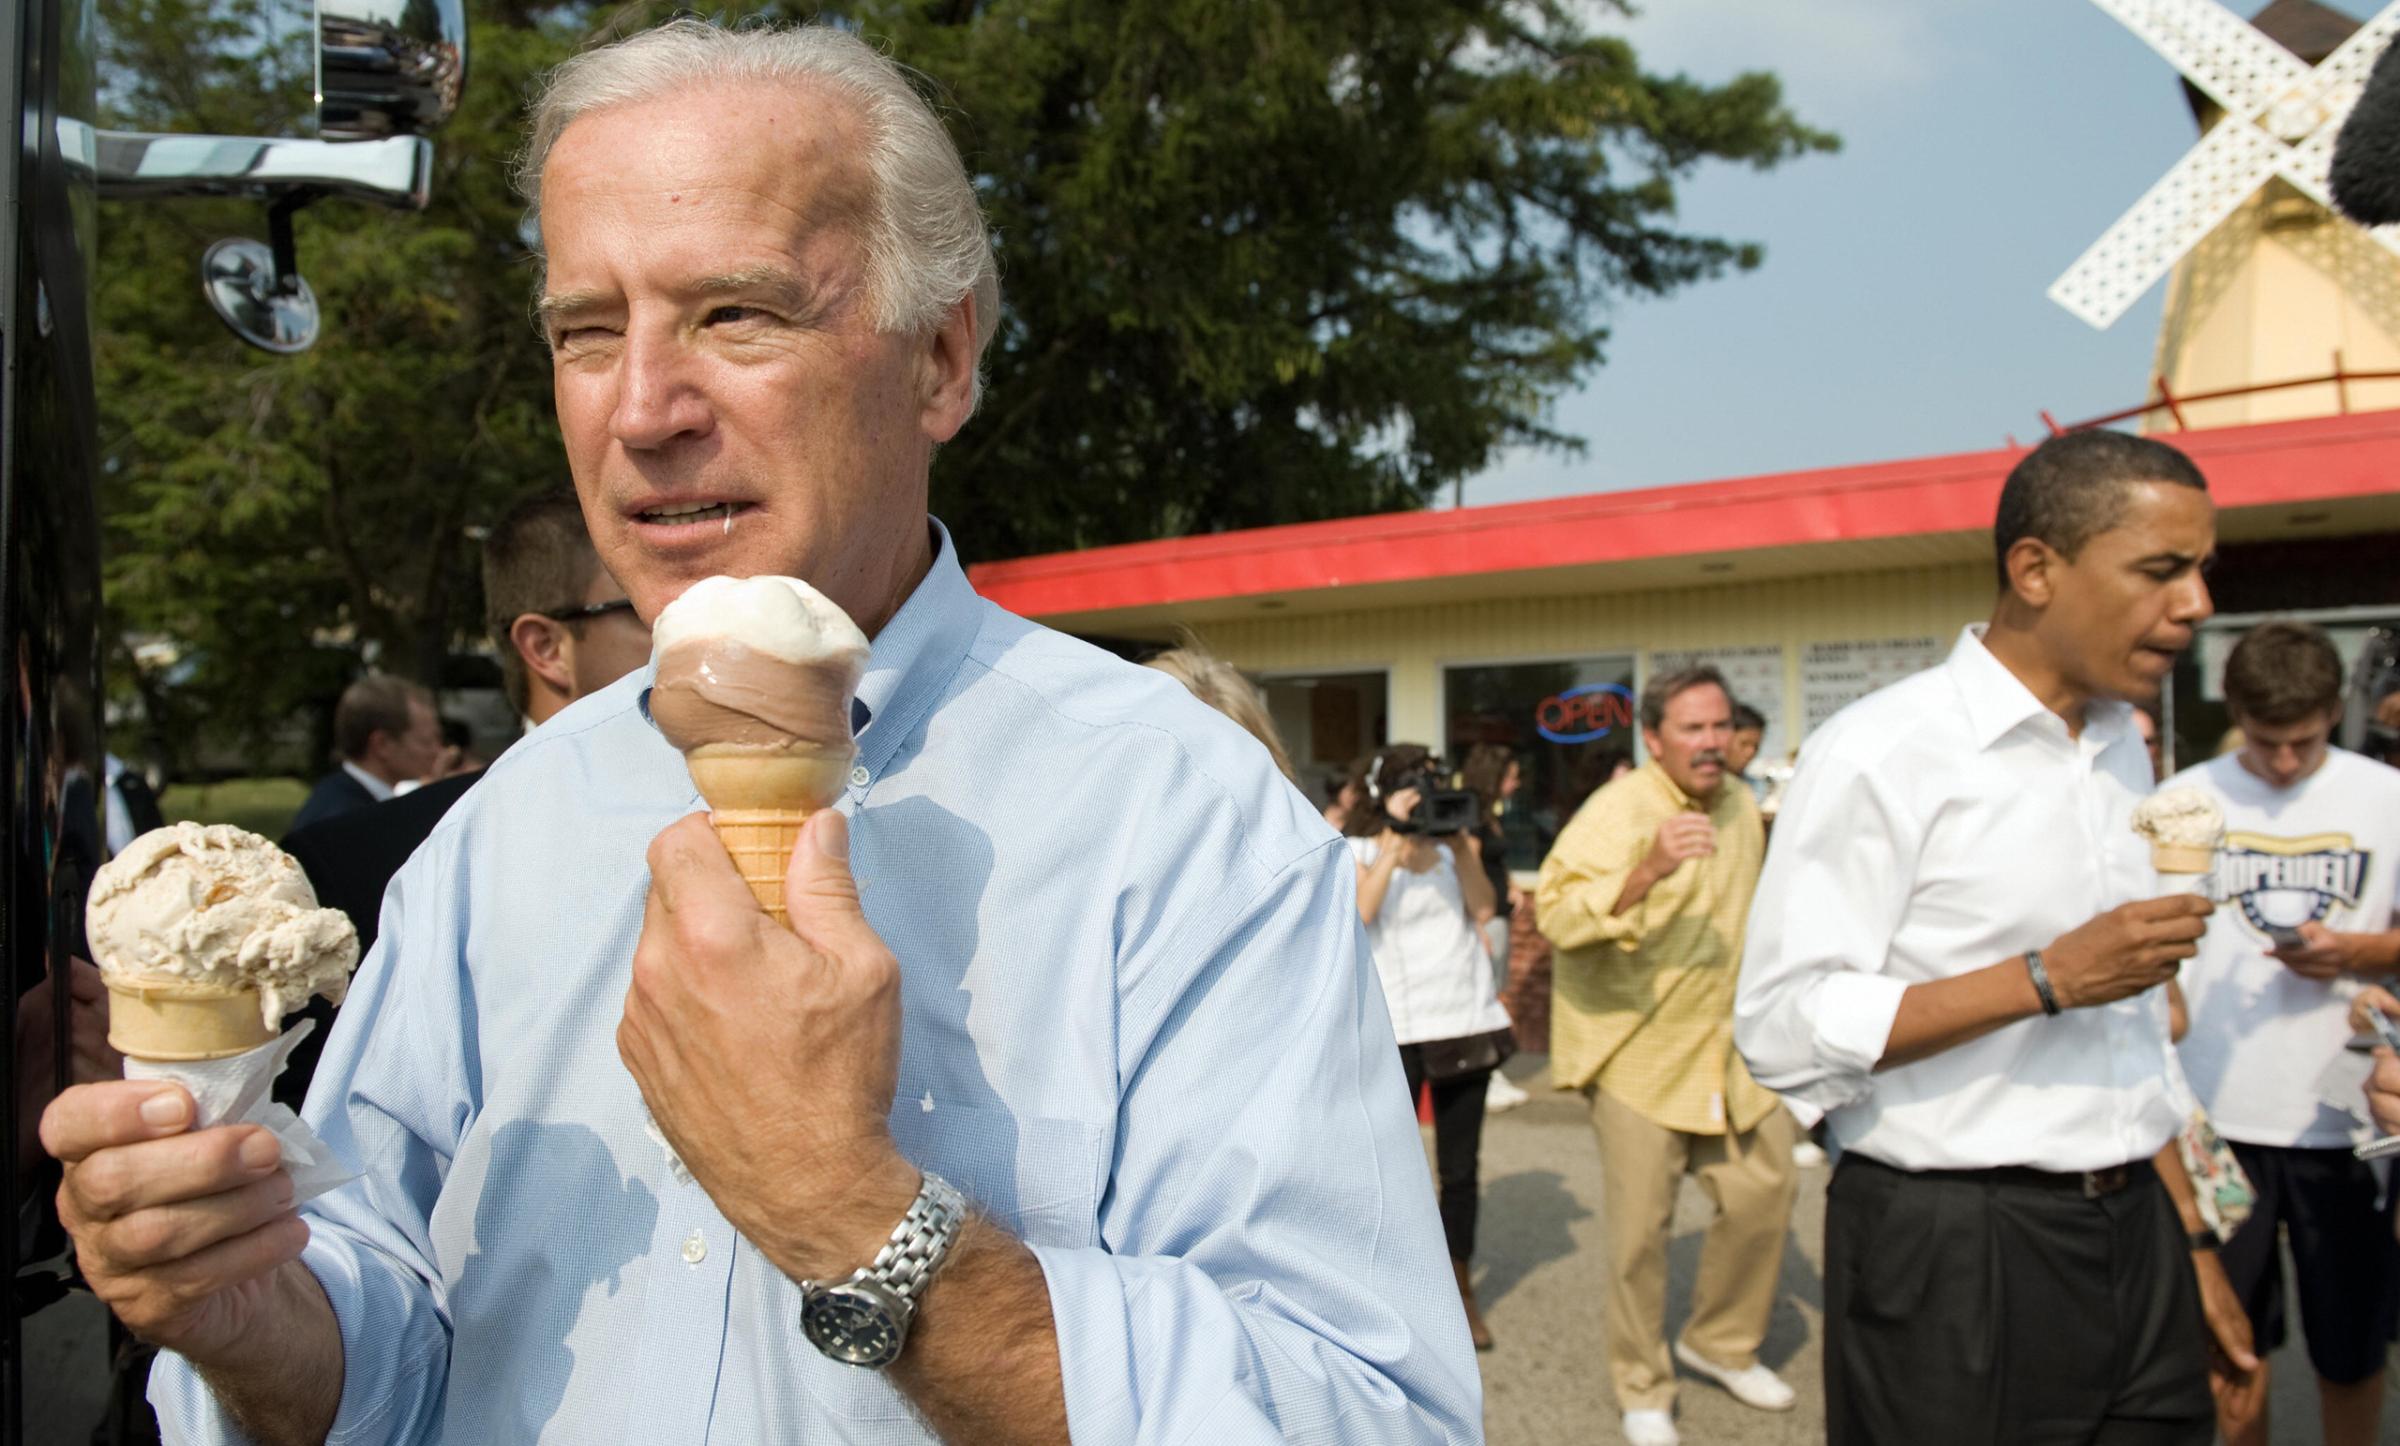 Vice presidential nominee Senator Joe Biden and Democratic presidential nominee Senator Barack Obama enjoy ice cream cones as they speak with local residents at the Windmill Ice Cream Shop in Aliquippa, Penns. on Aug. 29, 2008.